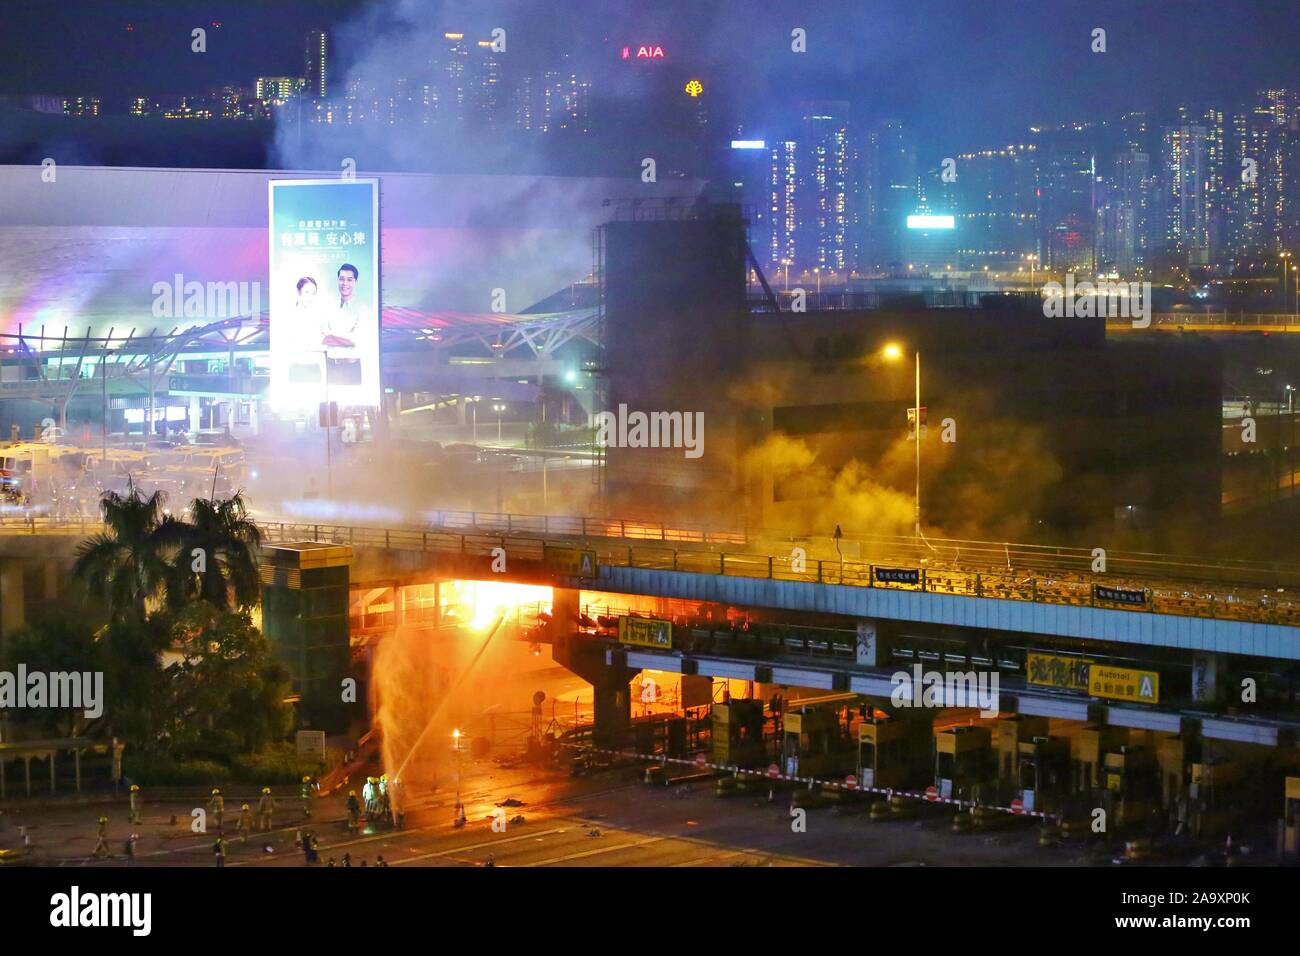 Hong Kong, China. 17th Nov, 2019. Protesters set fire to the entrance of Hong Kong's Polytechnic University to stop riot police from entering. Here protesters and police clash on a bridge connecting the campuses at the Hong Kong Polytechnic University on Sunday night. Credit: Gonzales Photo/Alamy Live News Stock Photo